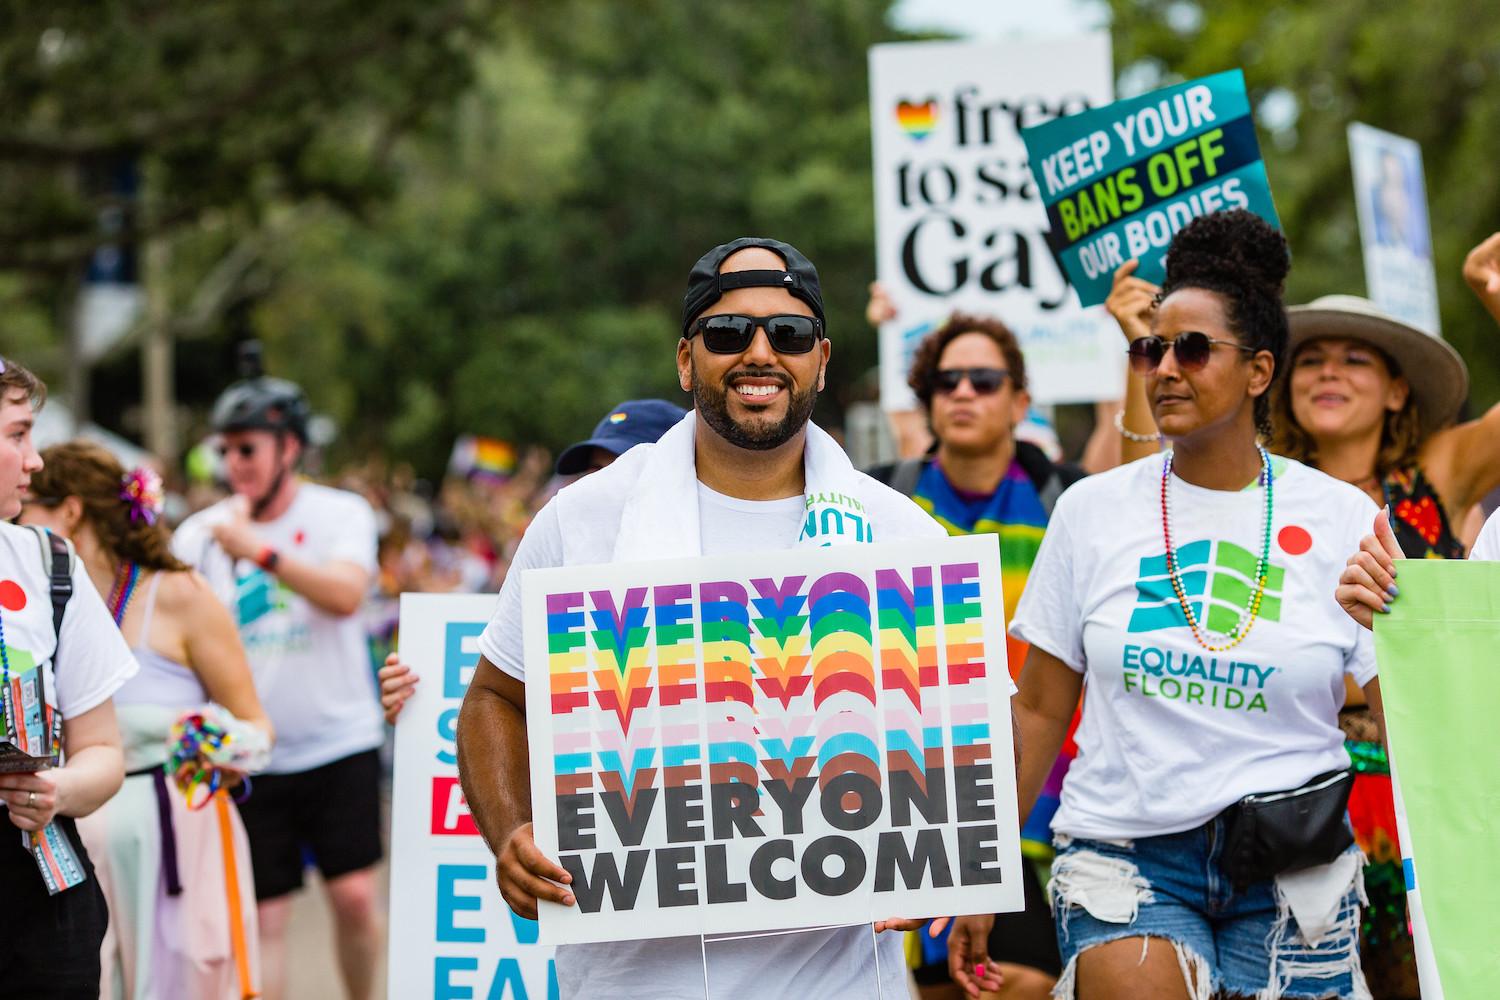 People smile and march carrying signs at a Pride Parade in St Petersburg Florida - LGBTQ+ rights